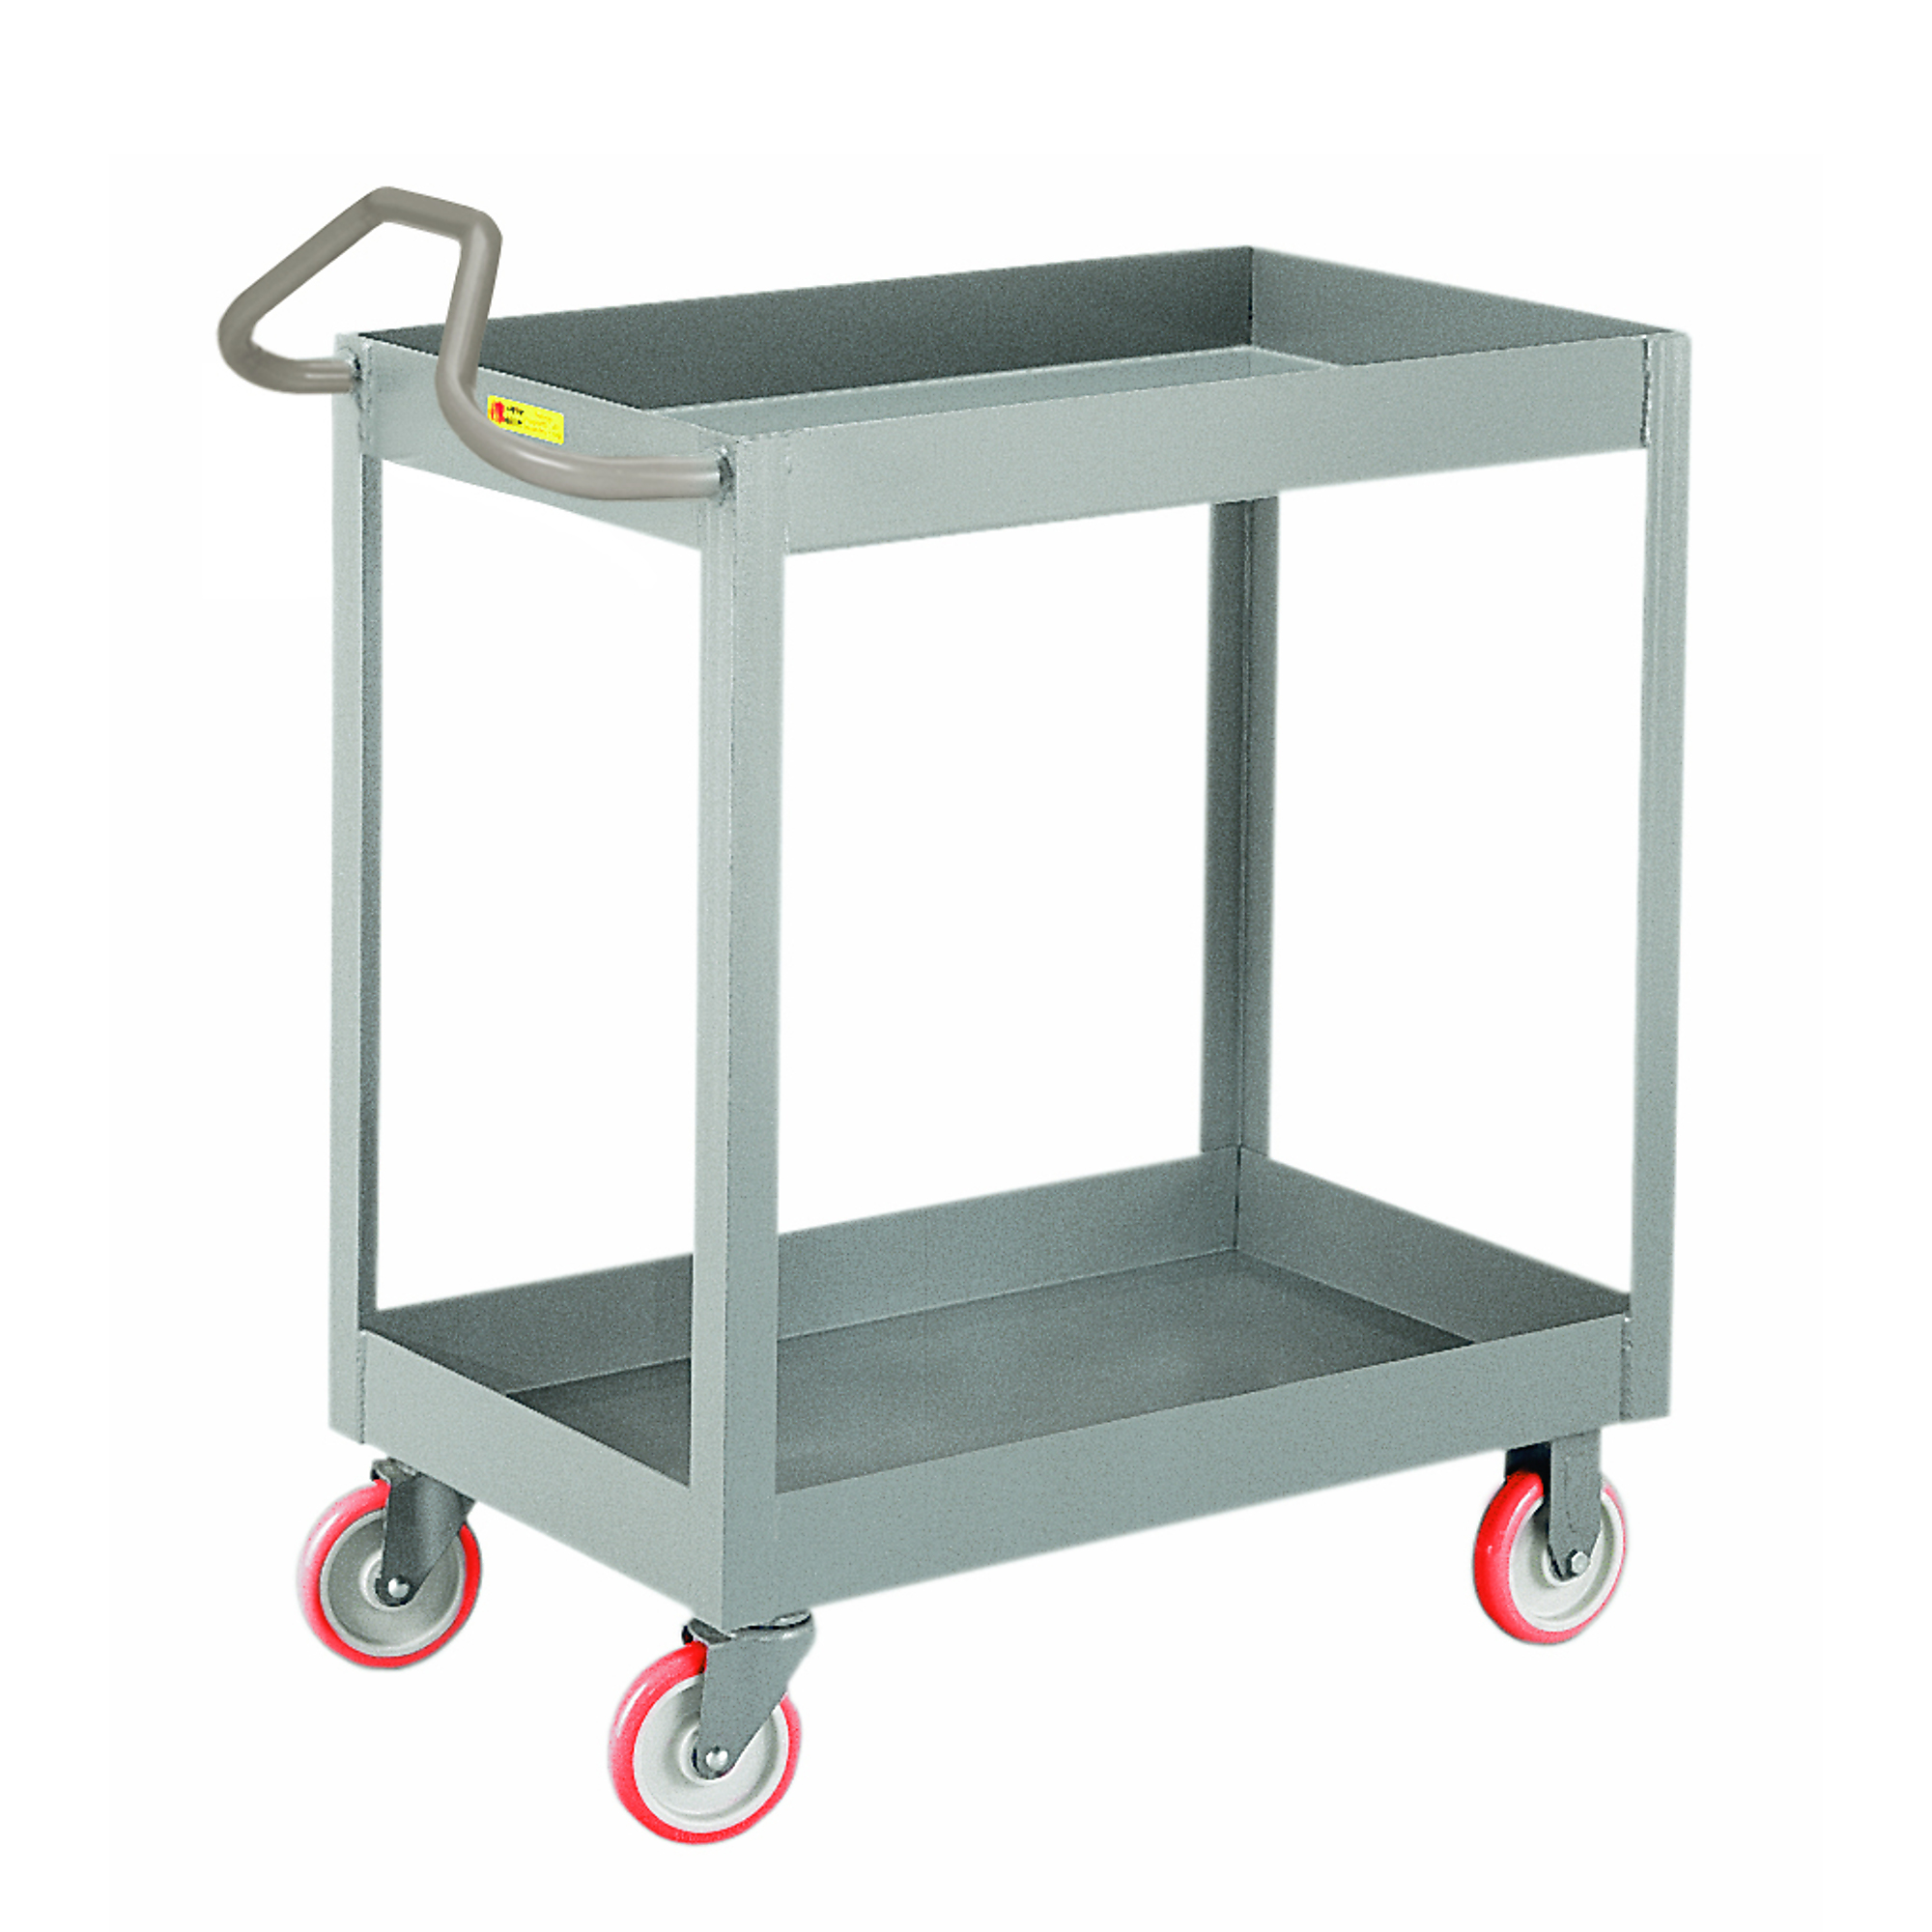 Little Giant, 3Inch Deep Shelf Truck, Ergo Handle, 24x48, 1200 lbs, Total Capacity 1200 lb, Shelves (qty.) 2, Material Carbon Steel, Model ENDS-2448X3